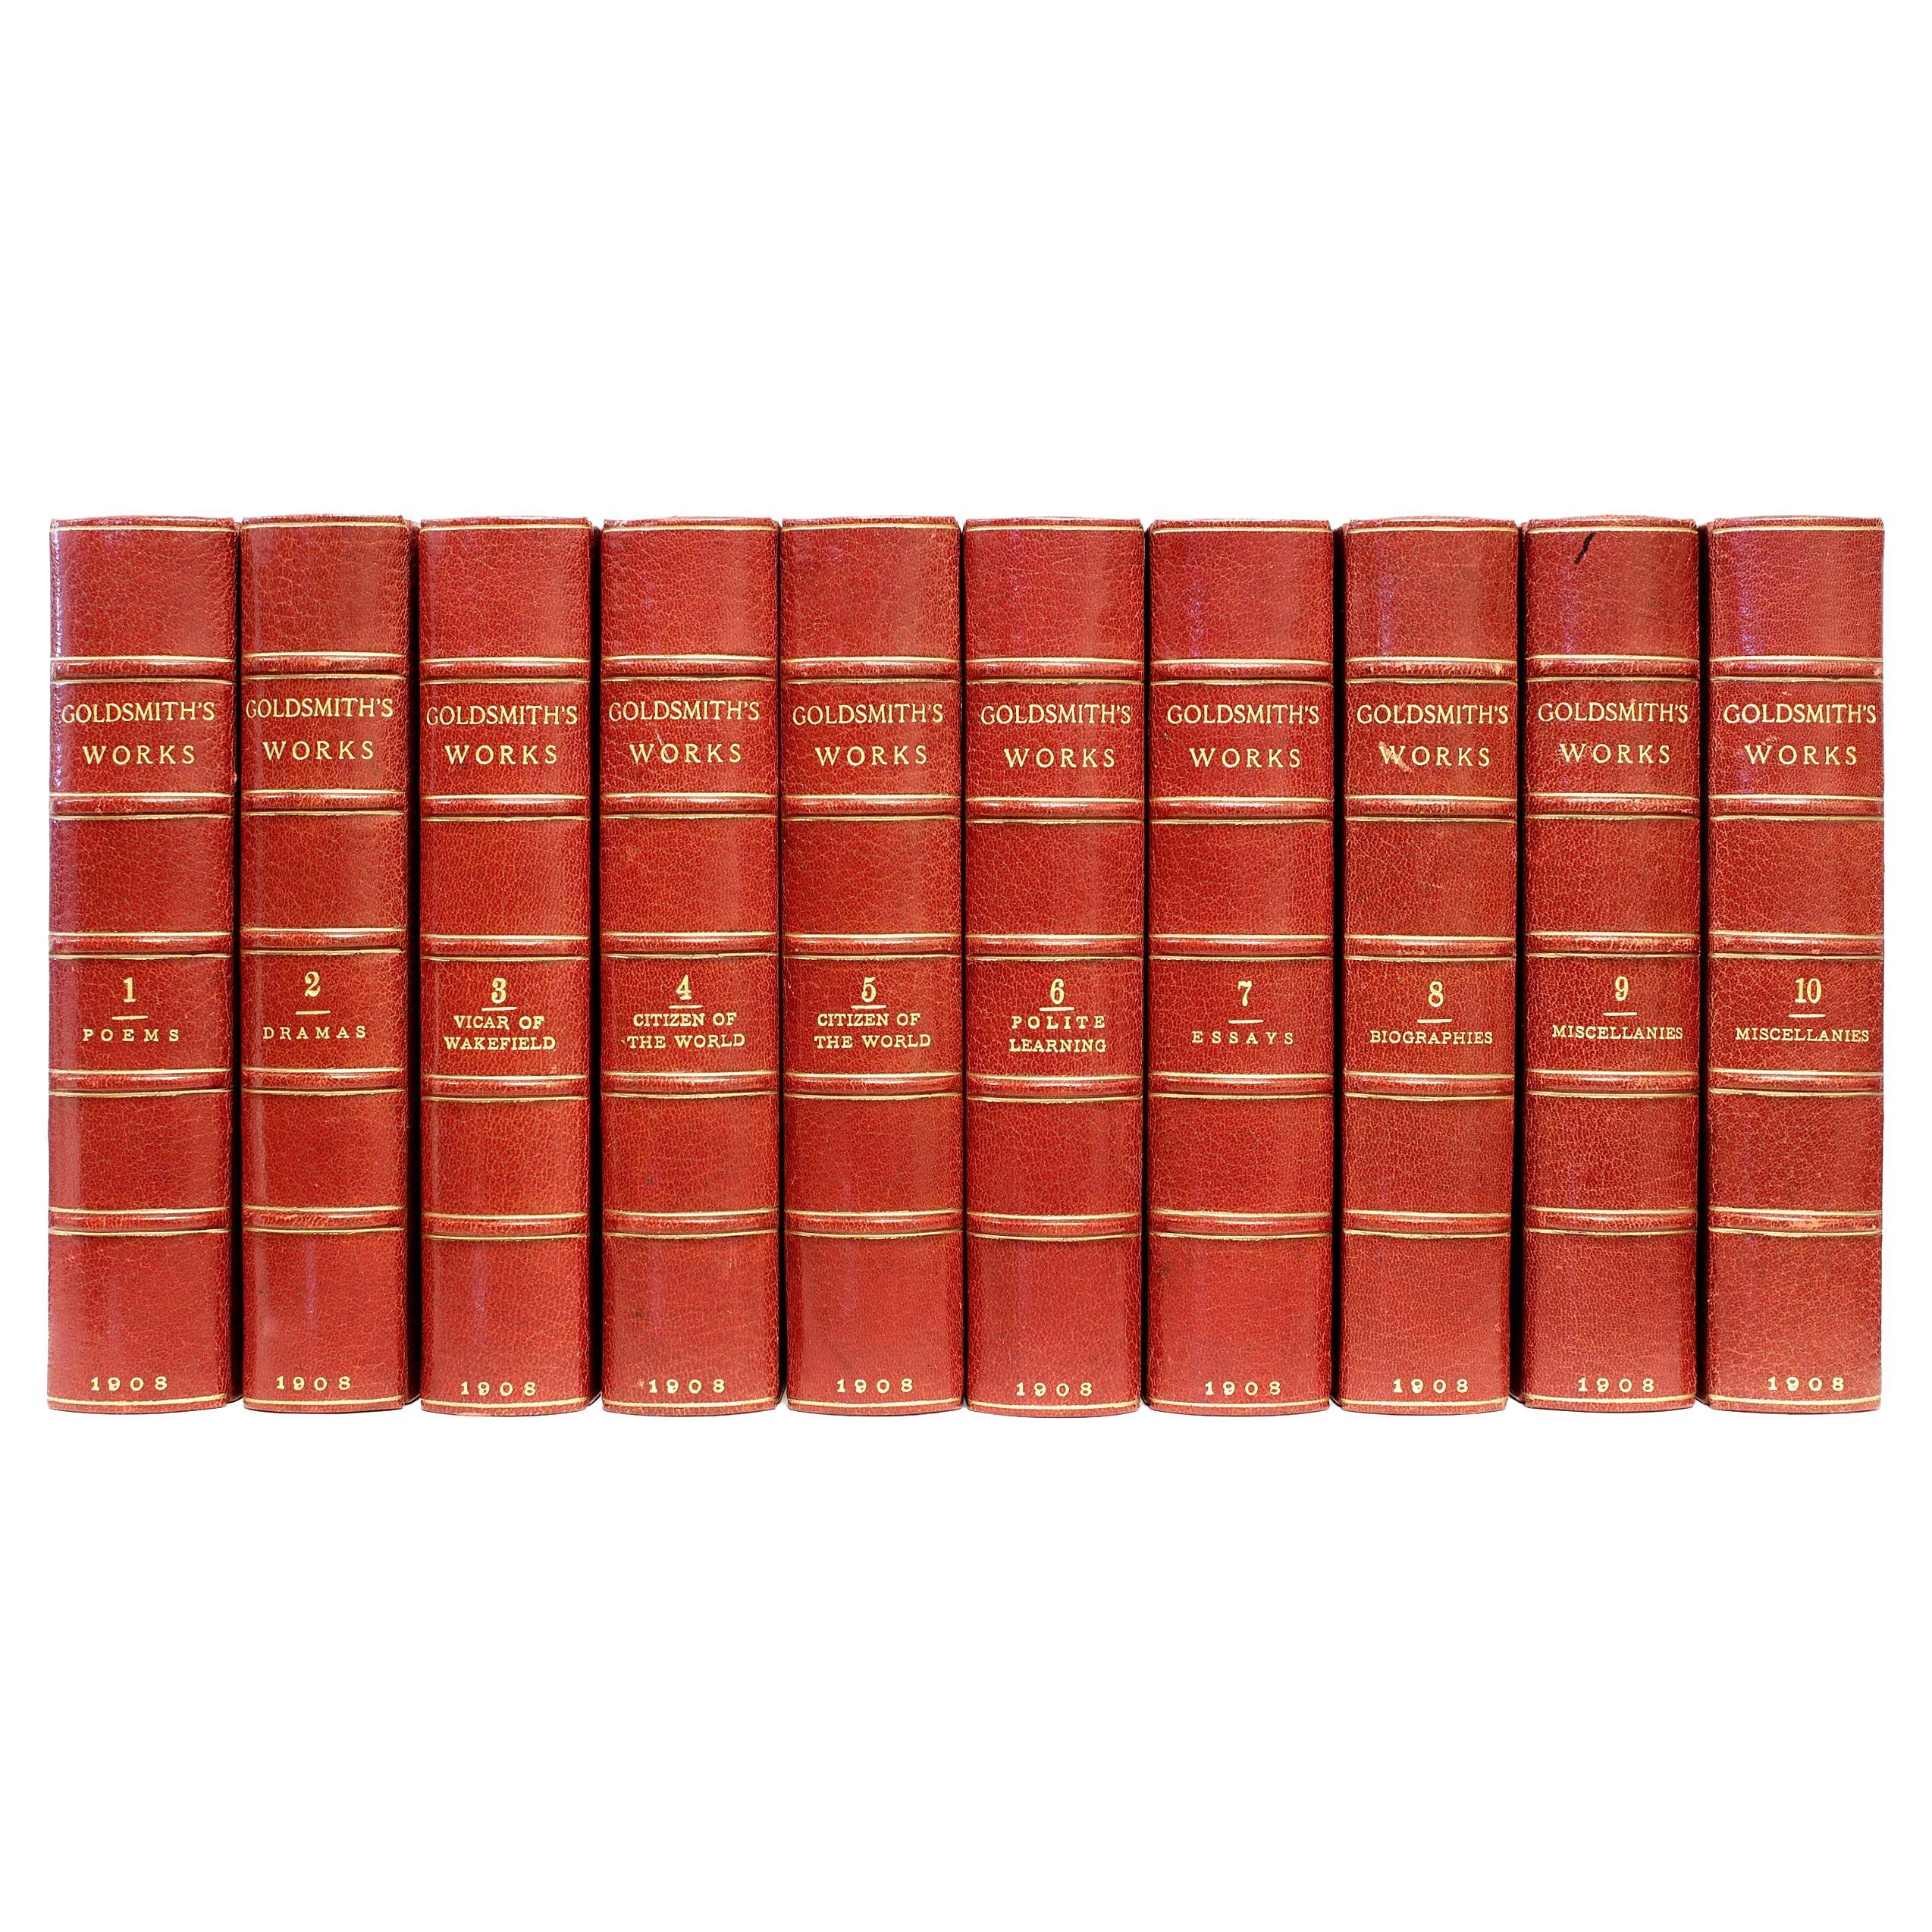 Œuvres d'Oliver Goldsmith-10 Vols.-Turk's Head Edition-in a Fine Binding